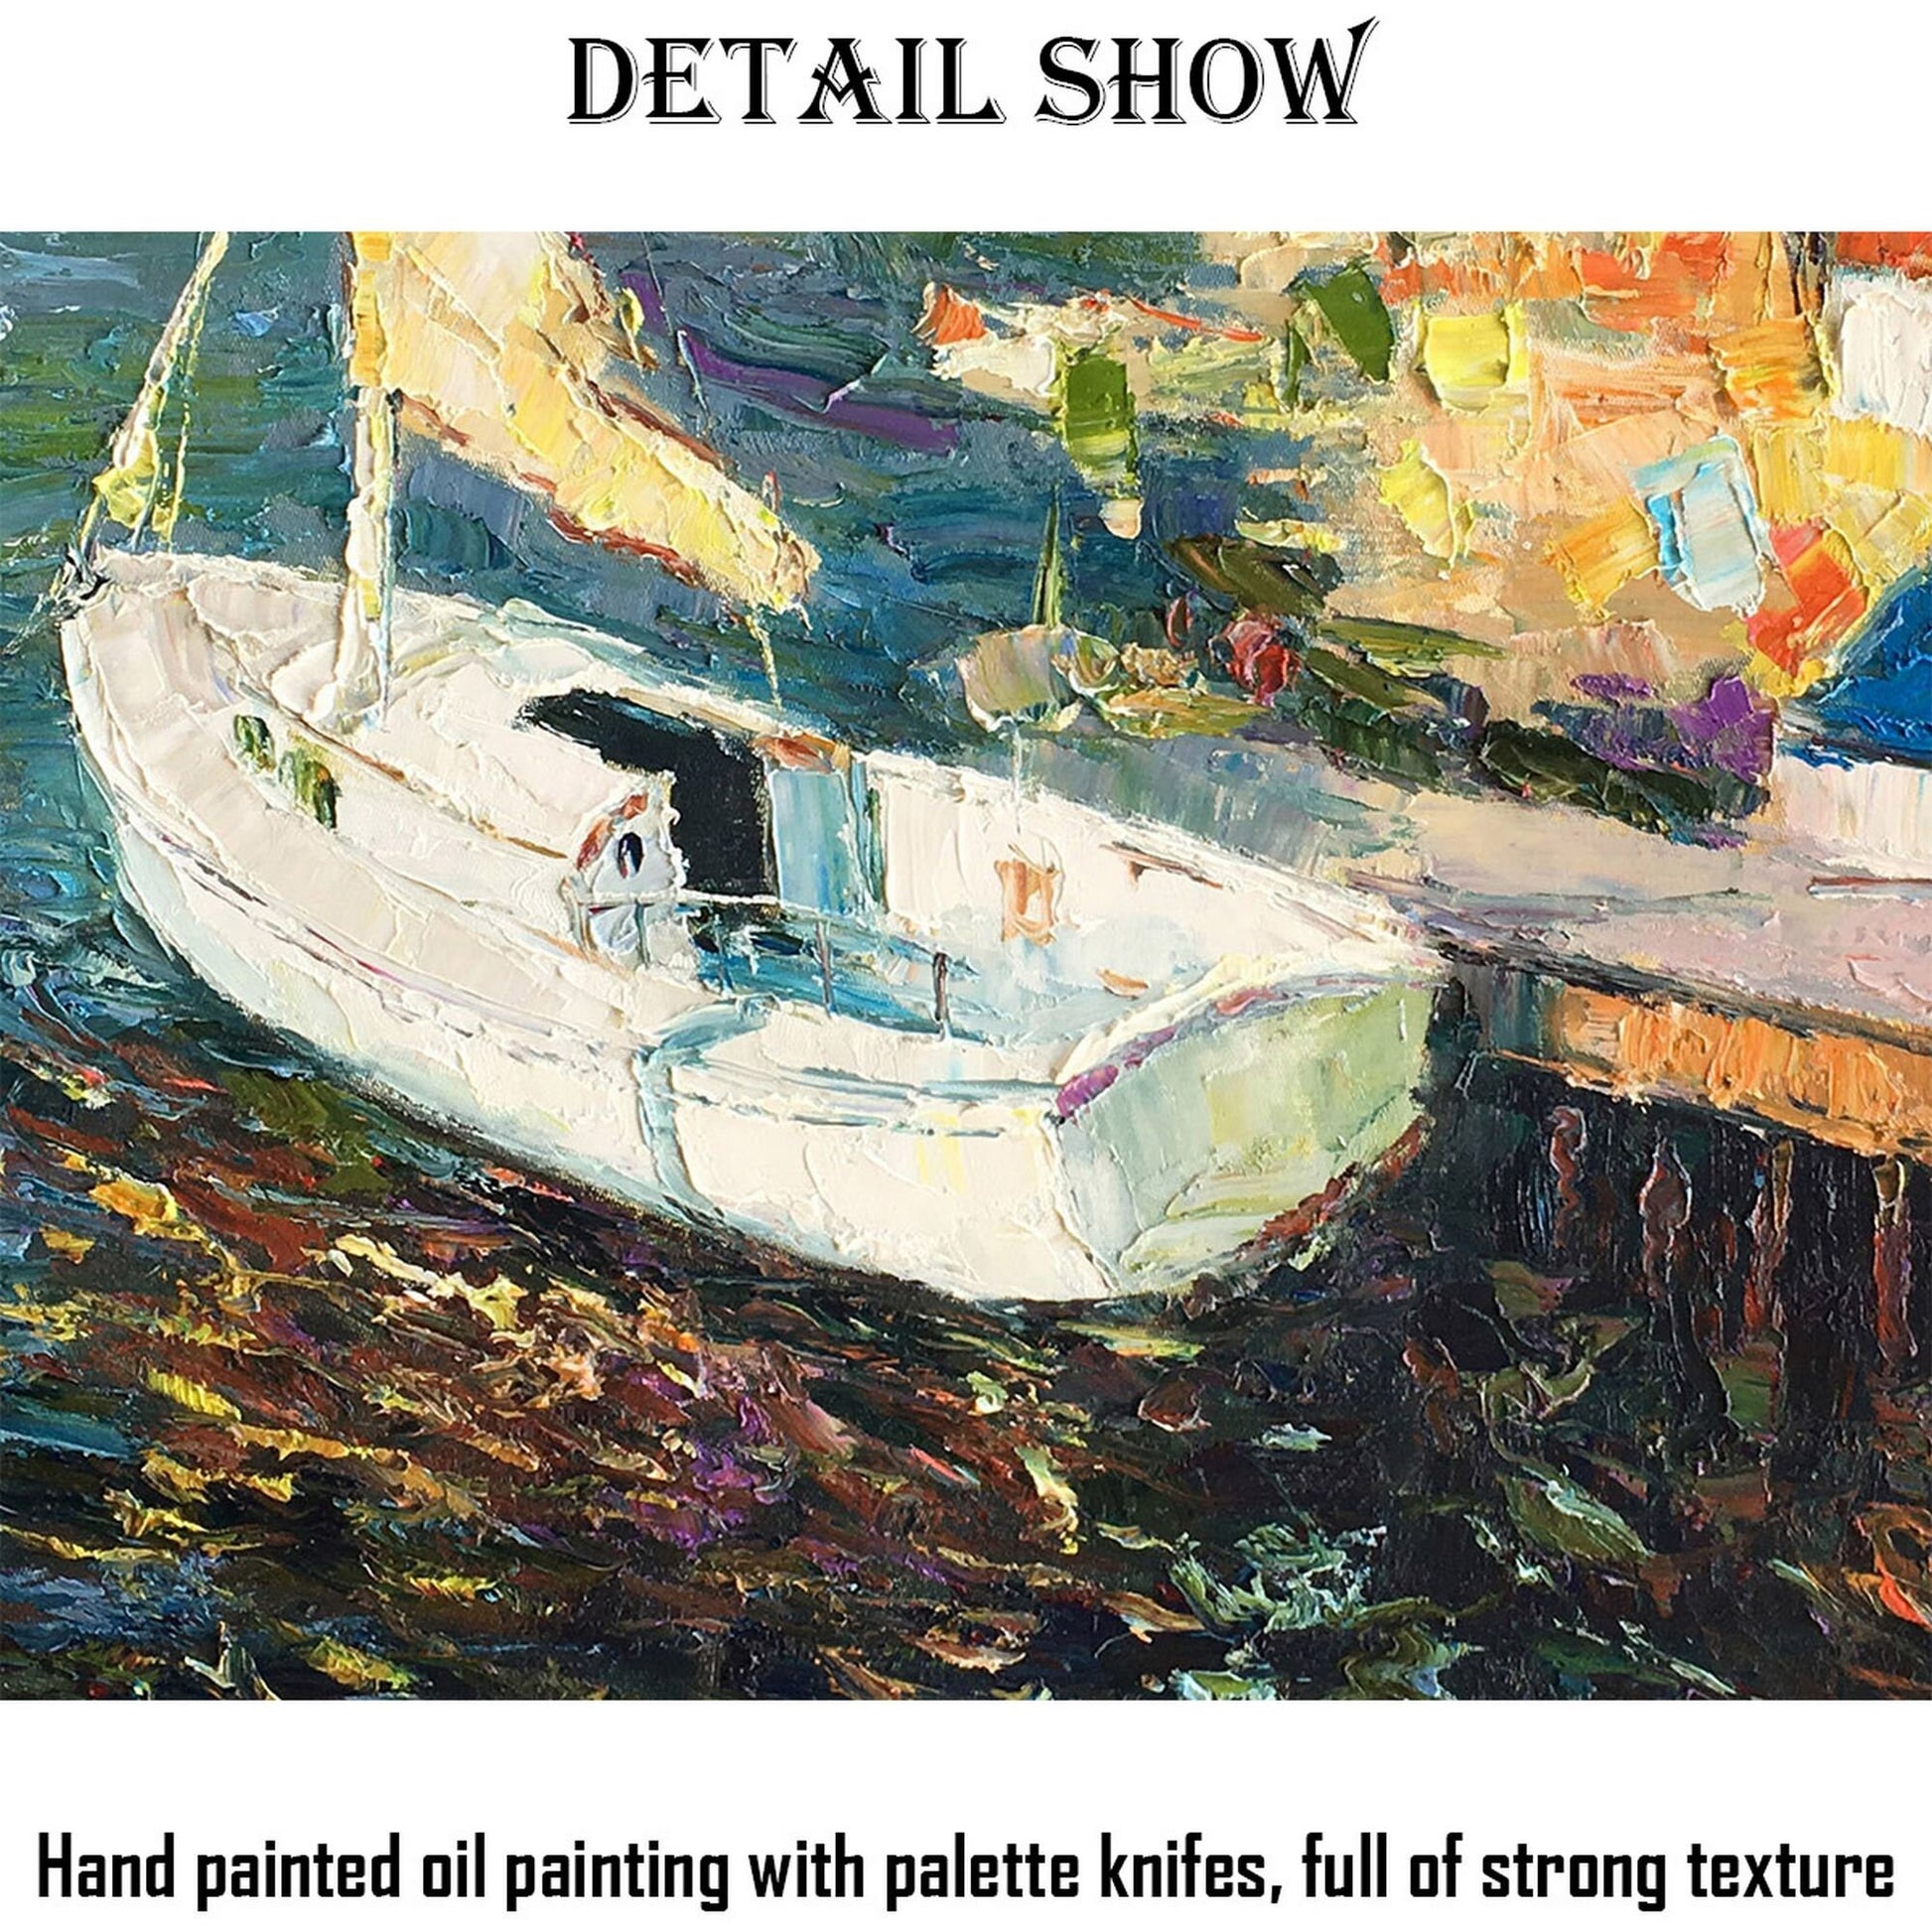 Original Oil Painting Finshing Boats At Sea, Seascape Oil Painting, Large Canvas Art, Handmade Painting, Modern Wall Art, Impasto Painting